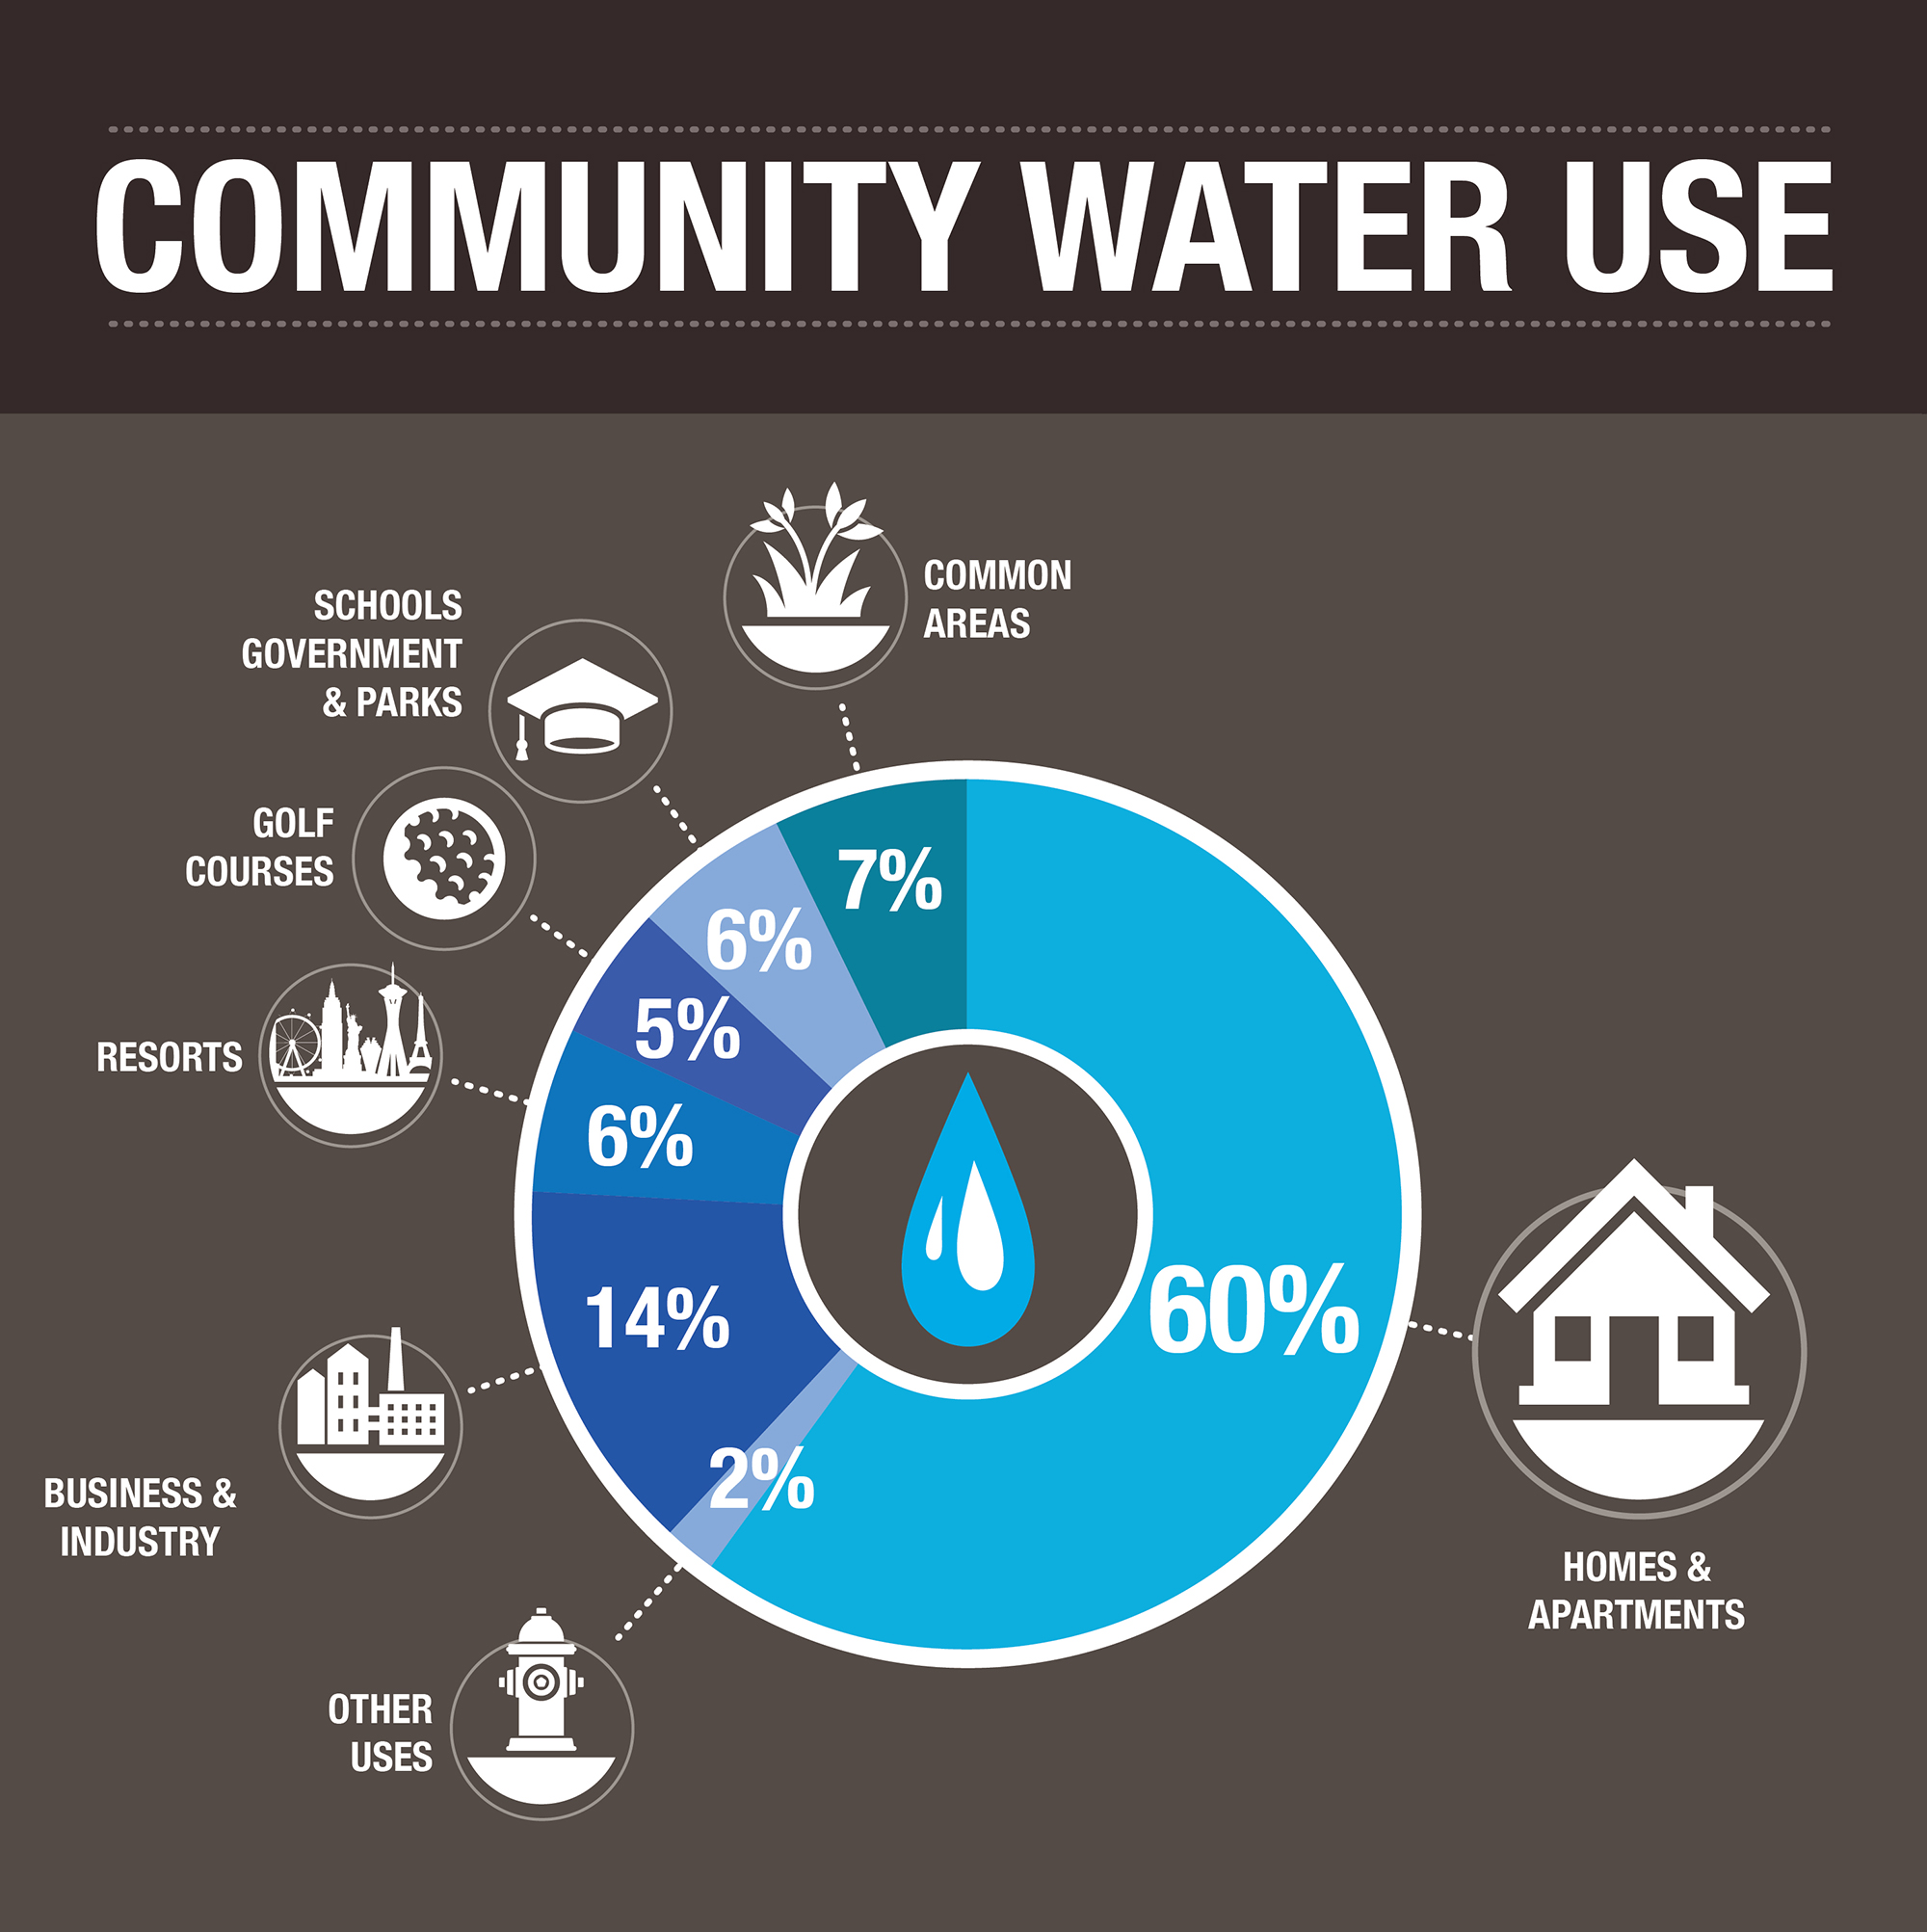 A graphic explaining that 60% of the community's water is used by homes and apartments, 7% in common areas, 6% by schools, government and parks, 5% by golf courses, 6% by resorts, 14% by business and industry and 2% by other uses